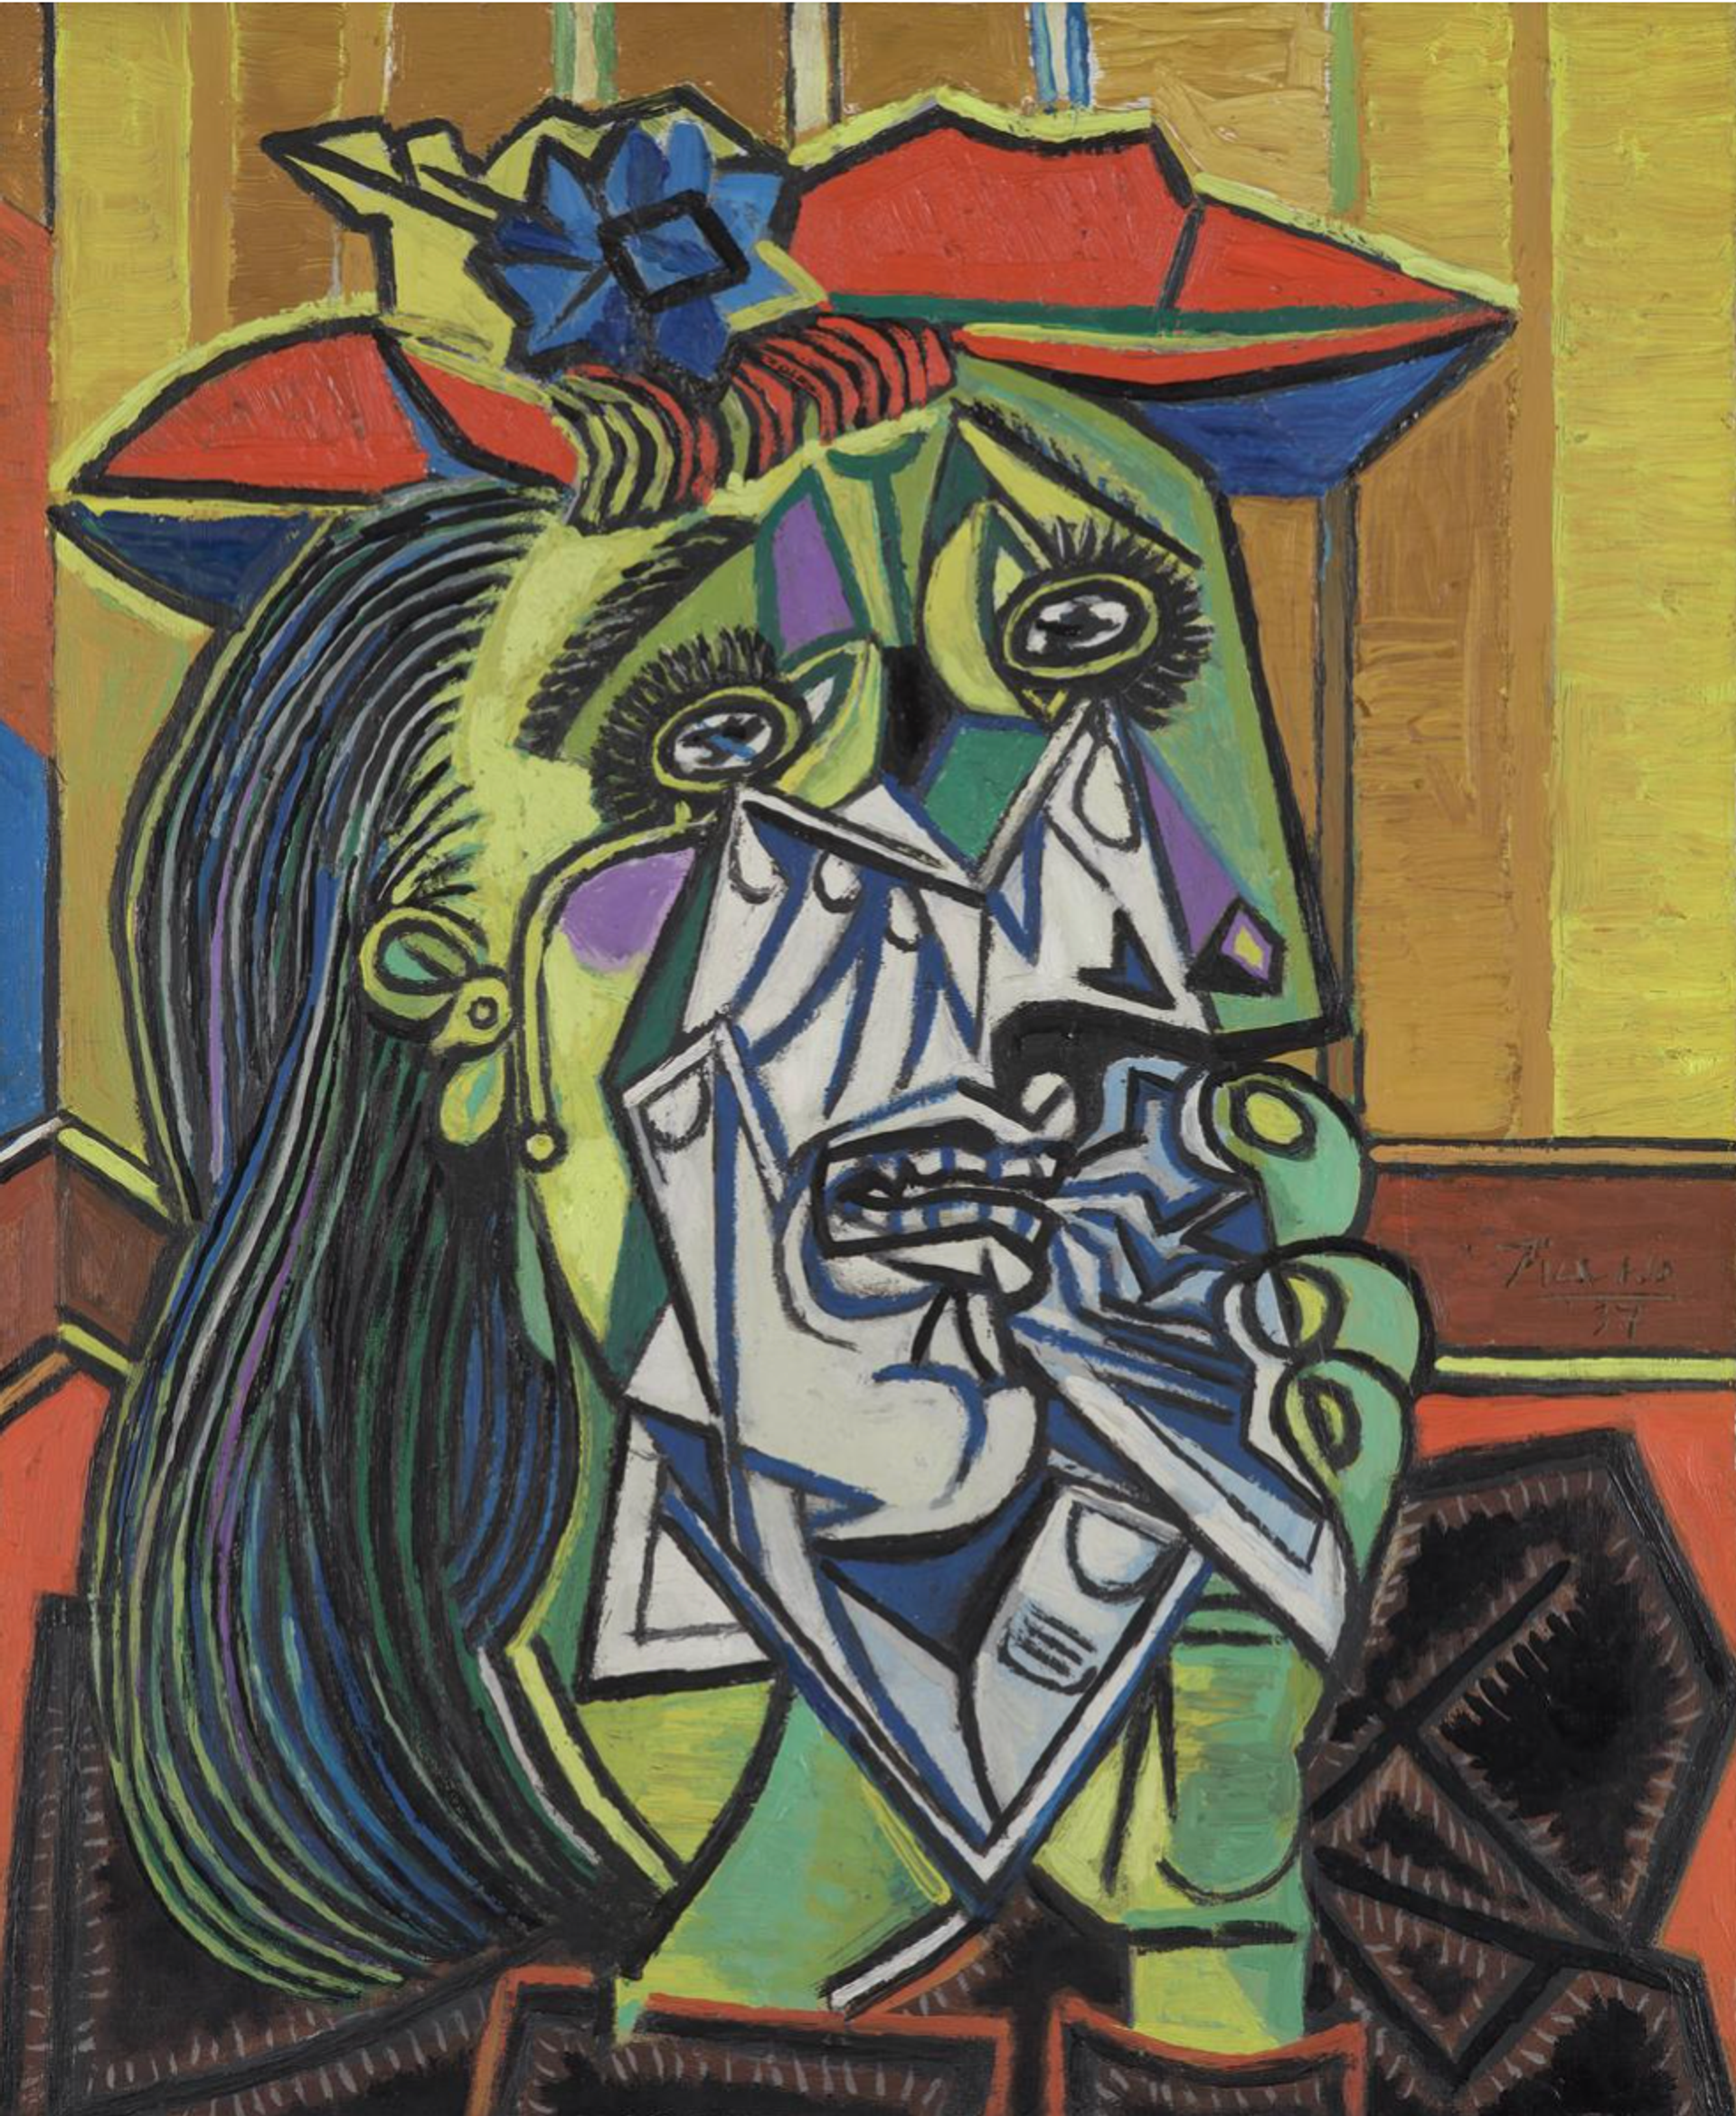 Painting by Pablo Picasso of a woman in despair. The portrait is fragmented into angular shapes and is comprised of green, yellow, grey, blue, orange and brown. 